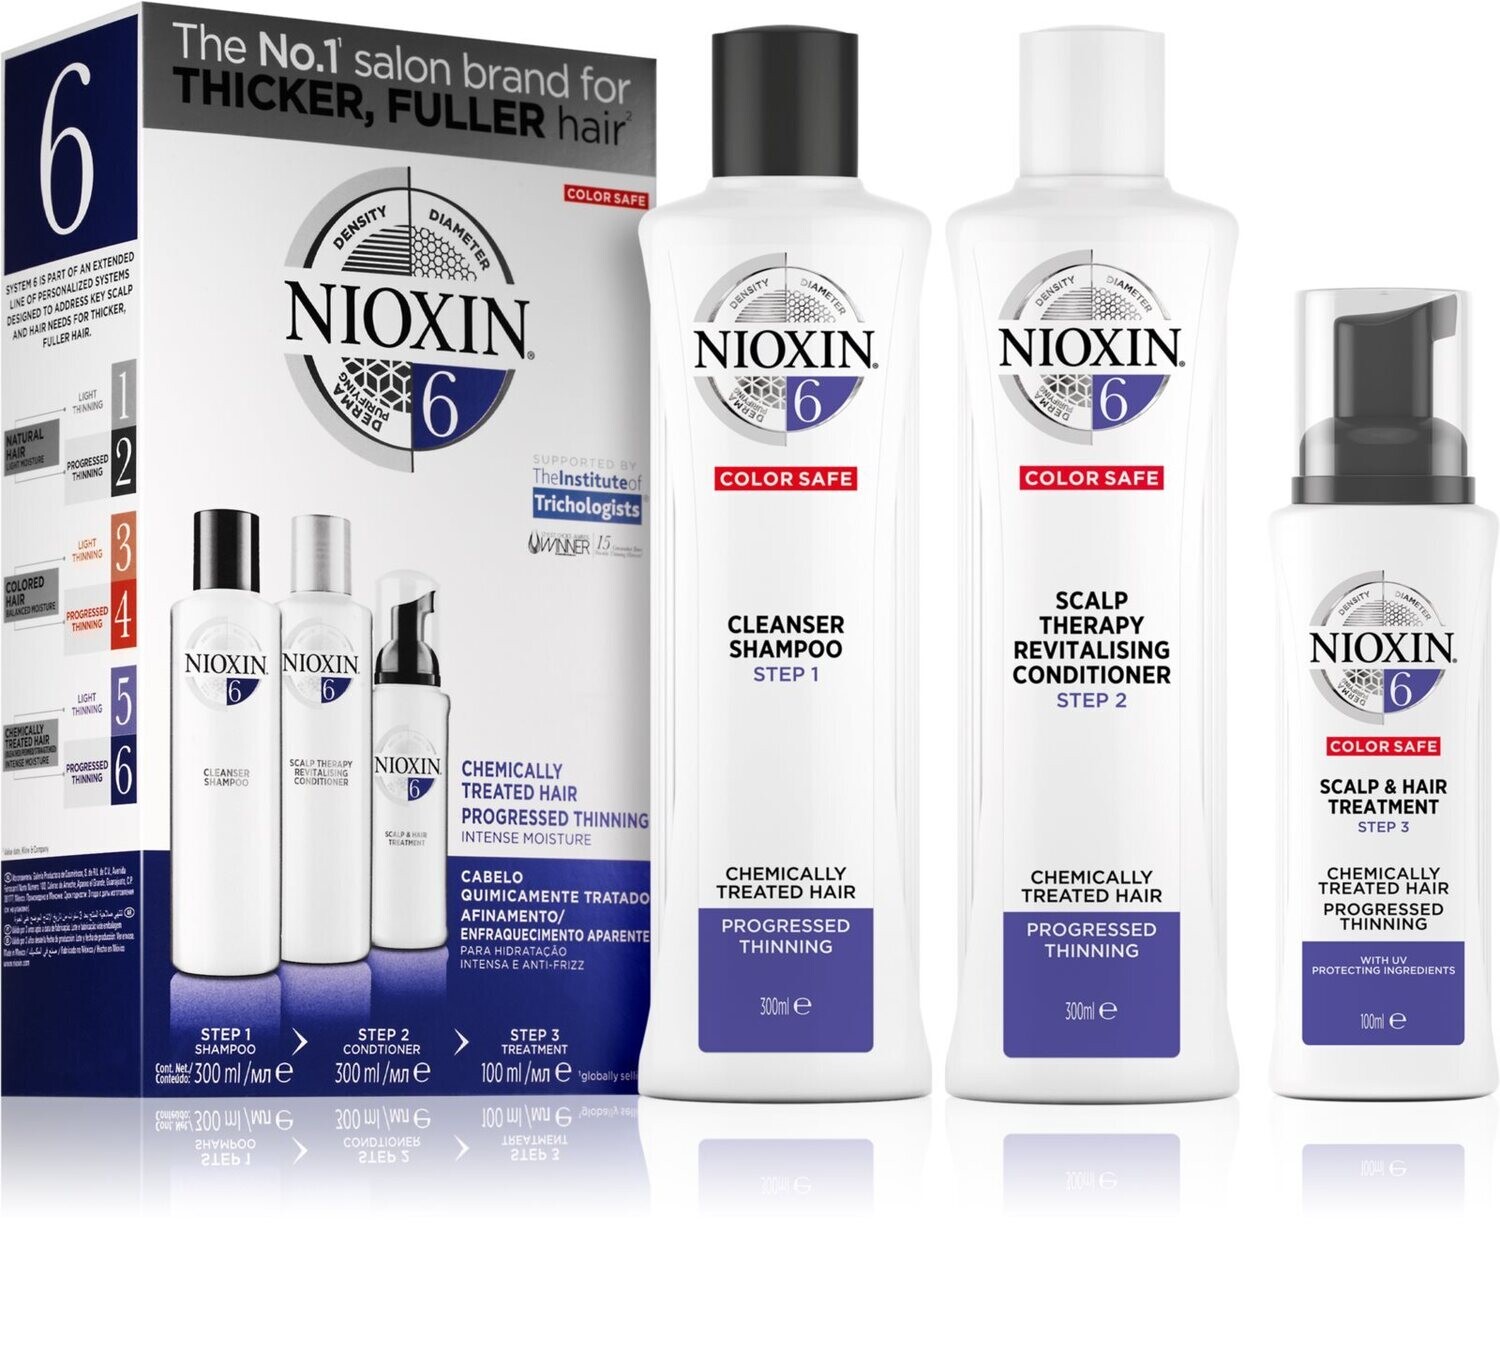 Nioxin Kit System 6 - Chemically Treated Hair (Progressed Thinning)